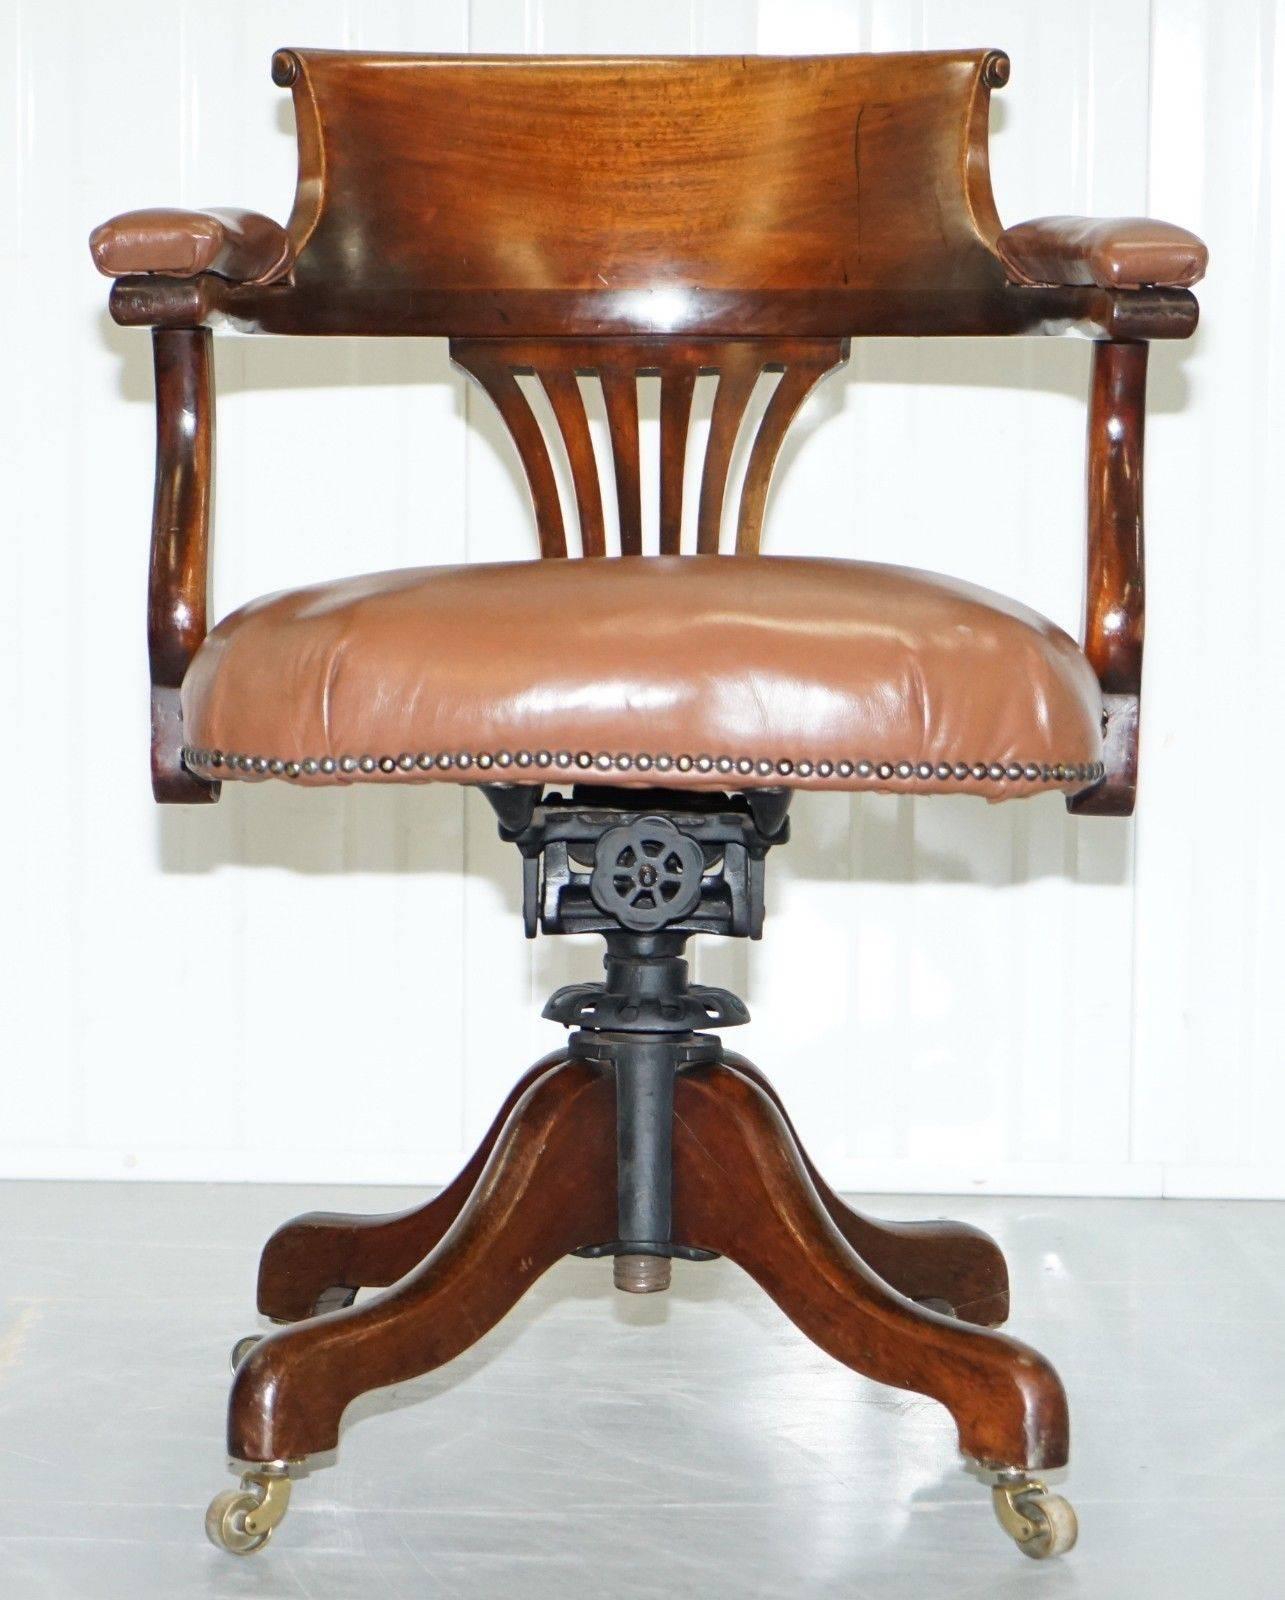 We are delighted to offer for sale this very nice aged brown leather American Victorian office captains chair with early original swivel movement

The chair has a lovely industrial look and feel to the frame mechanism, its all solid steel, hand